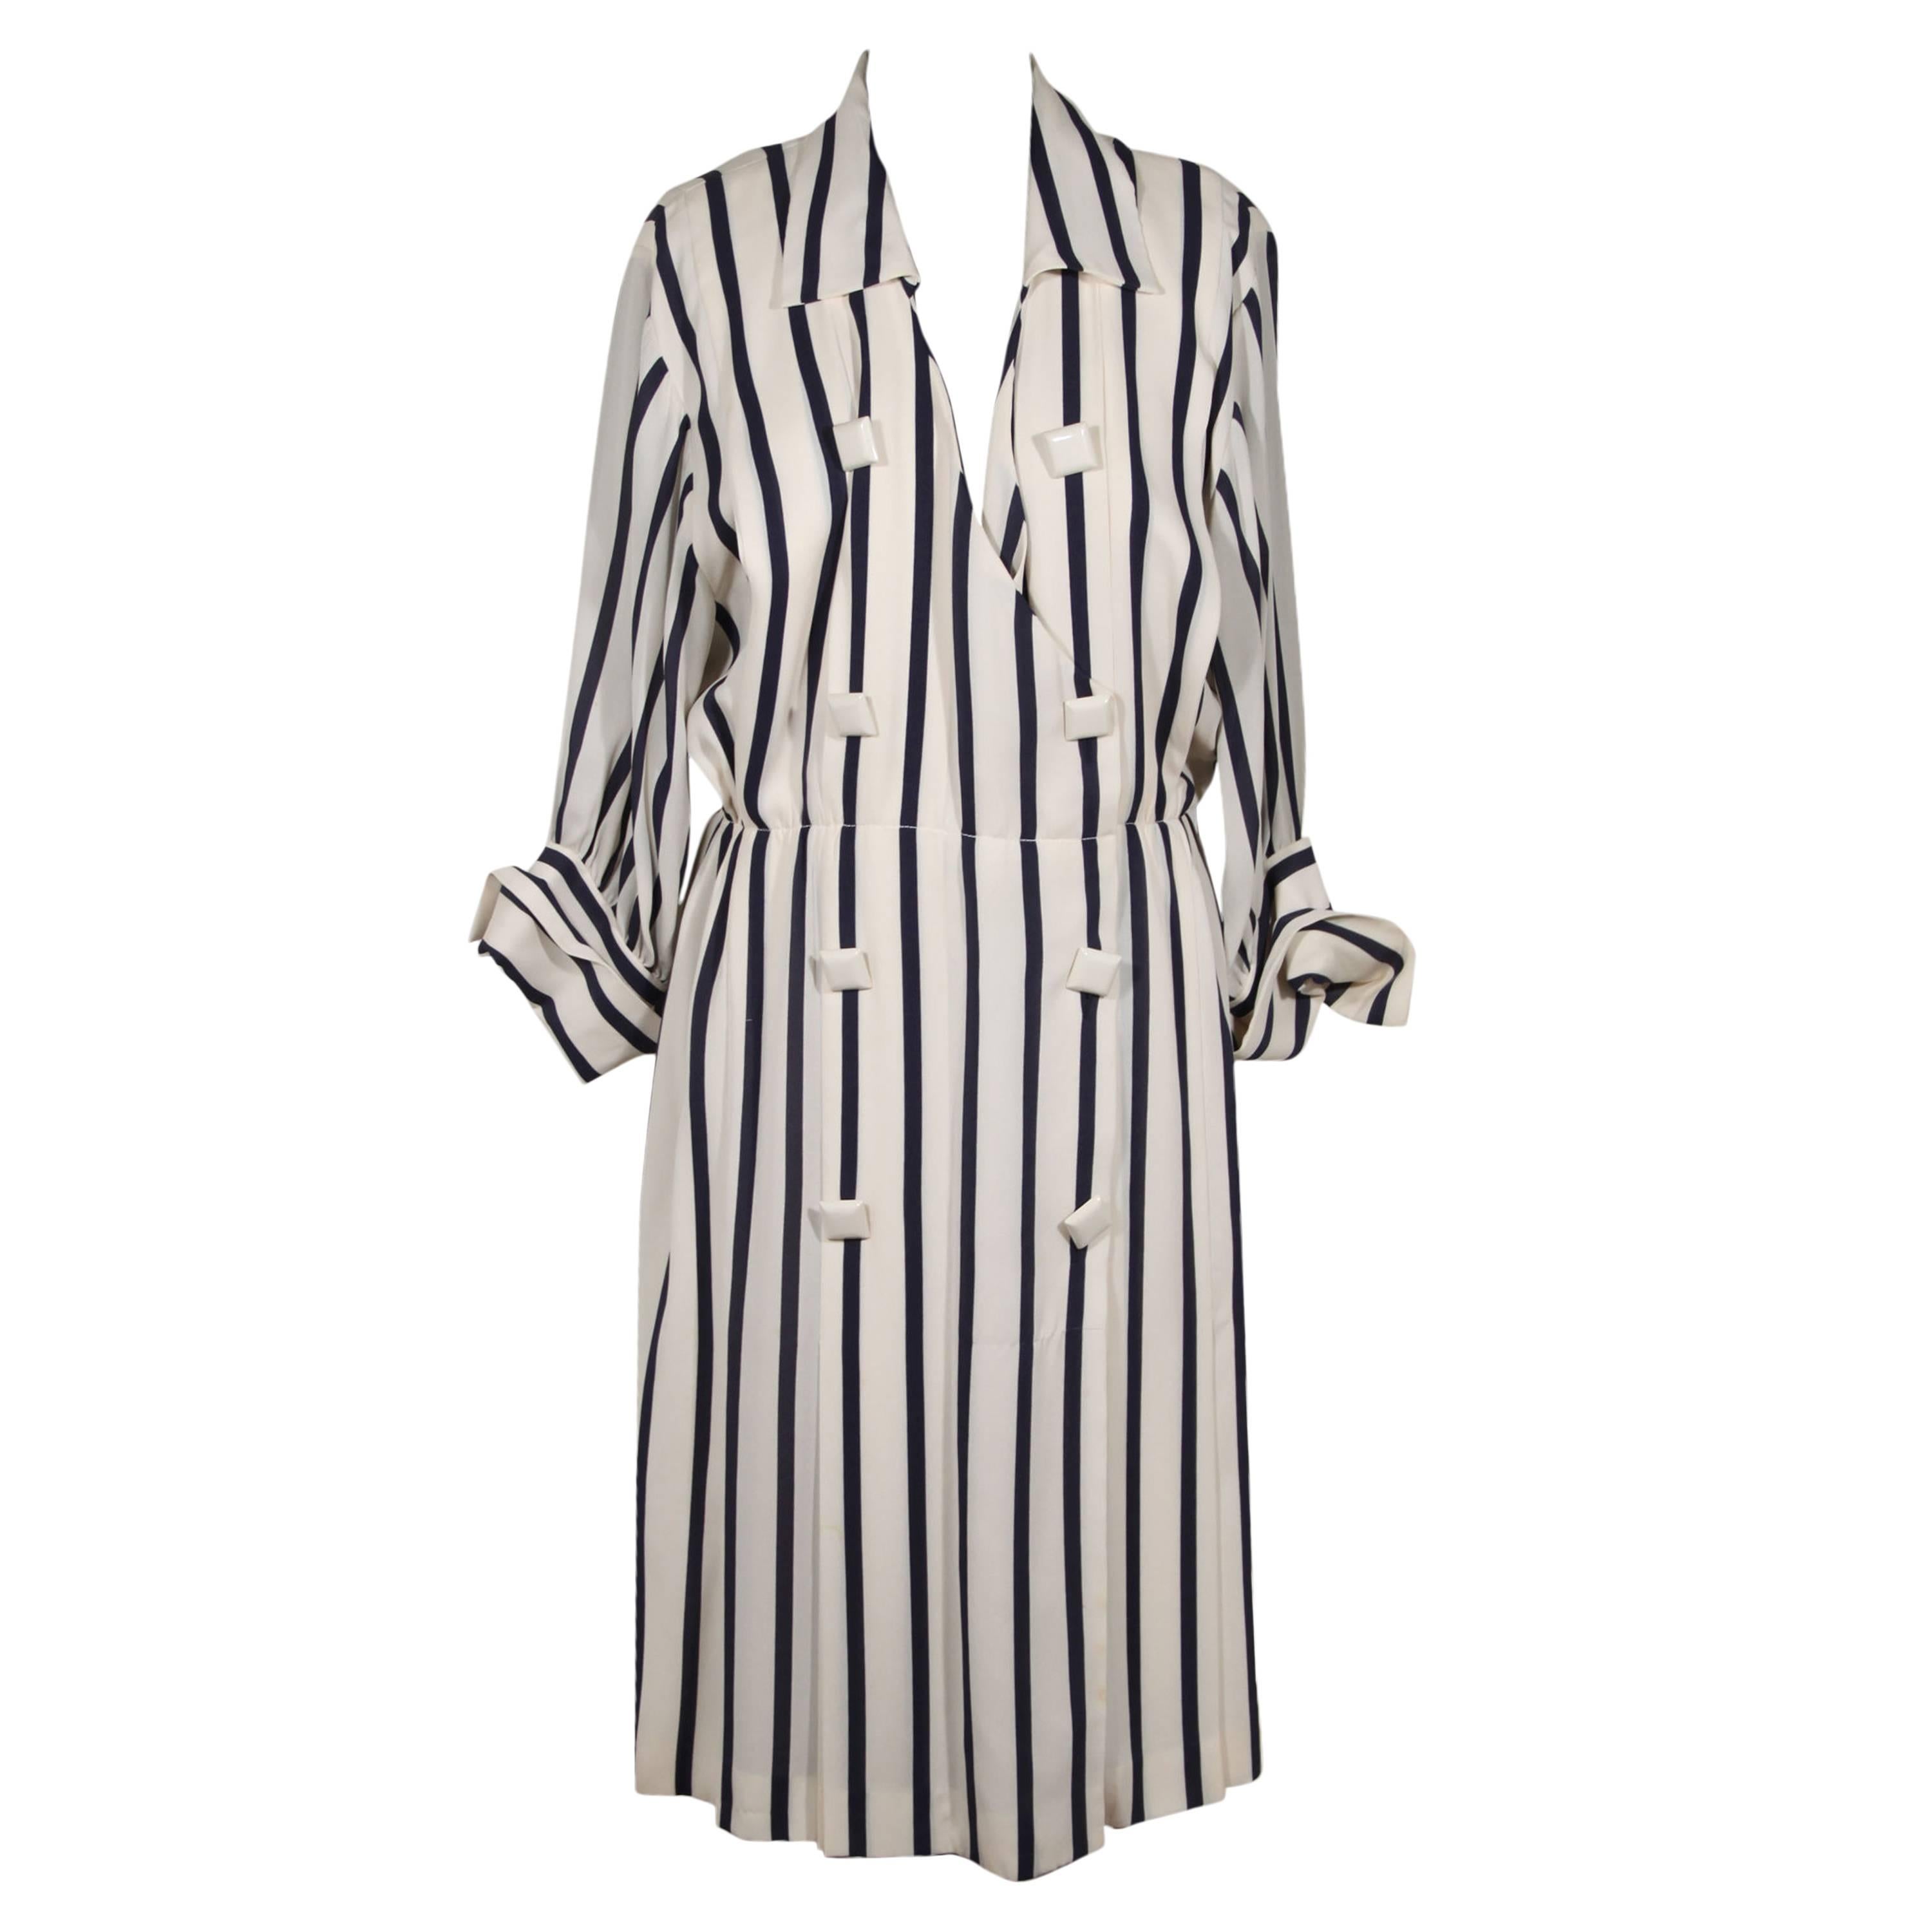 Andrea Odicini Italian Authentic Vintage White and Navy Striped Shirt Dress